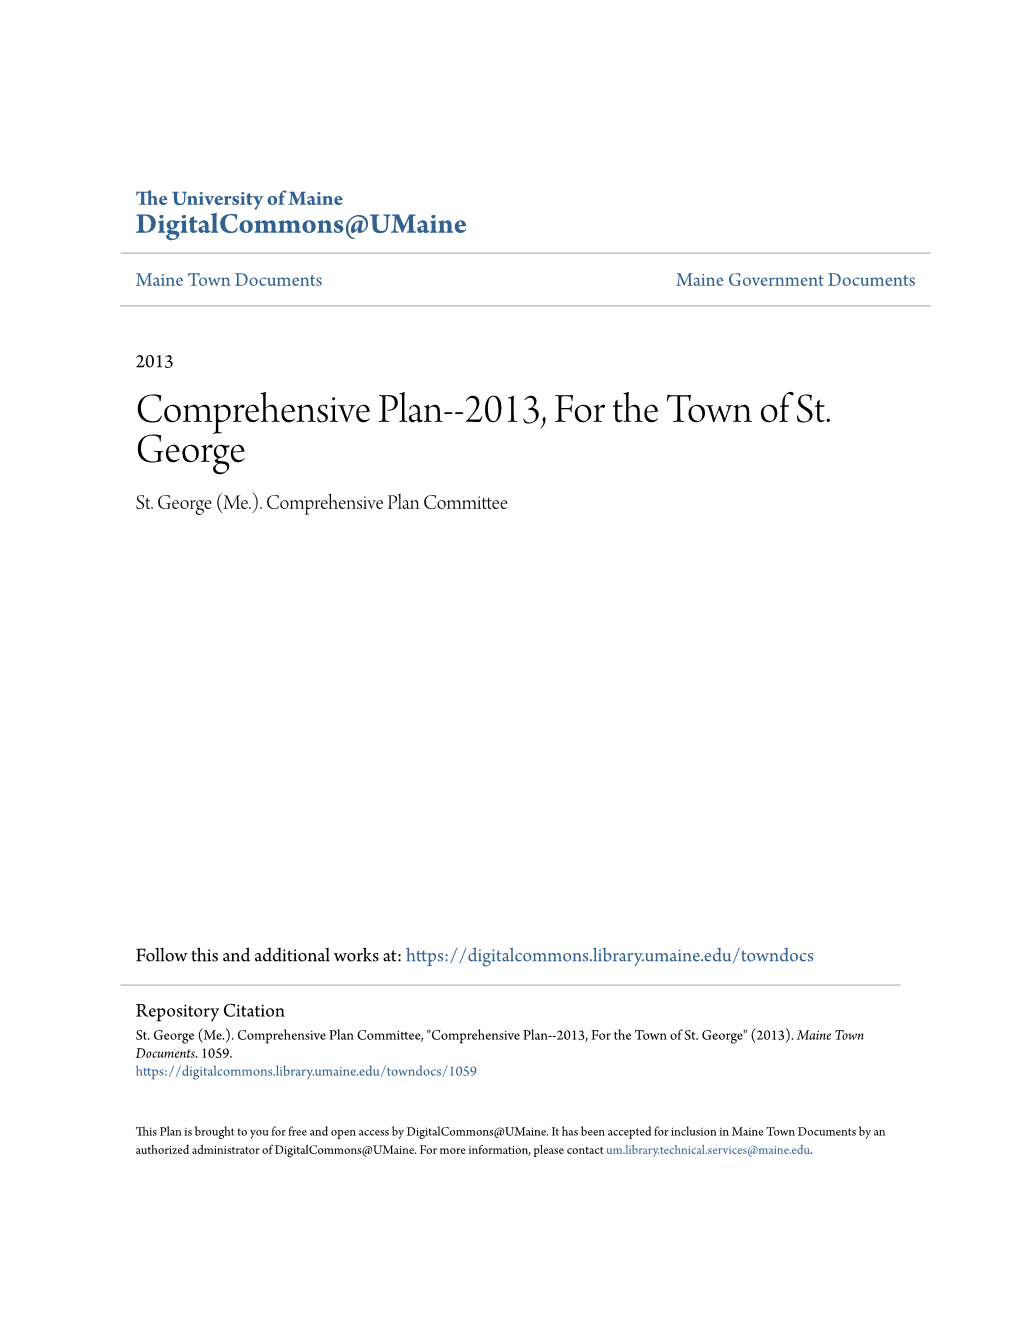 Comprehensive Plan--2013, for the Town of St. George St